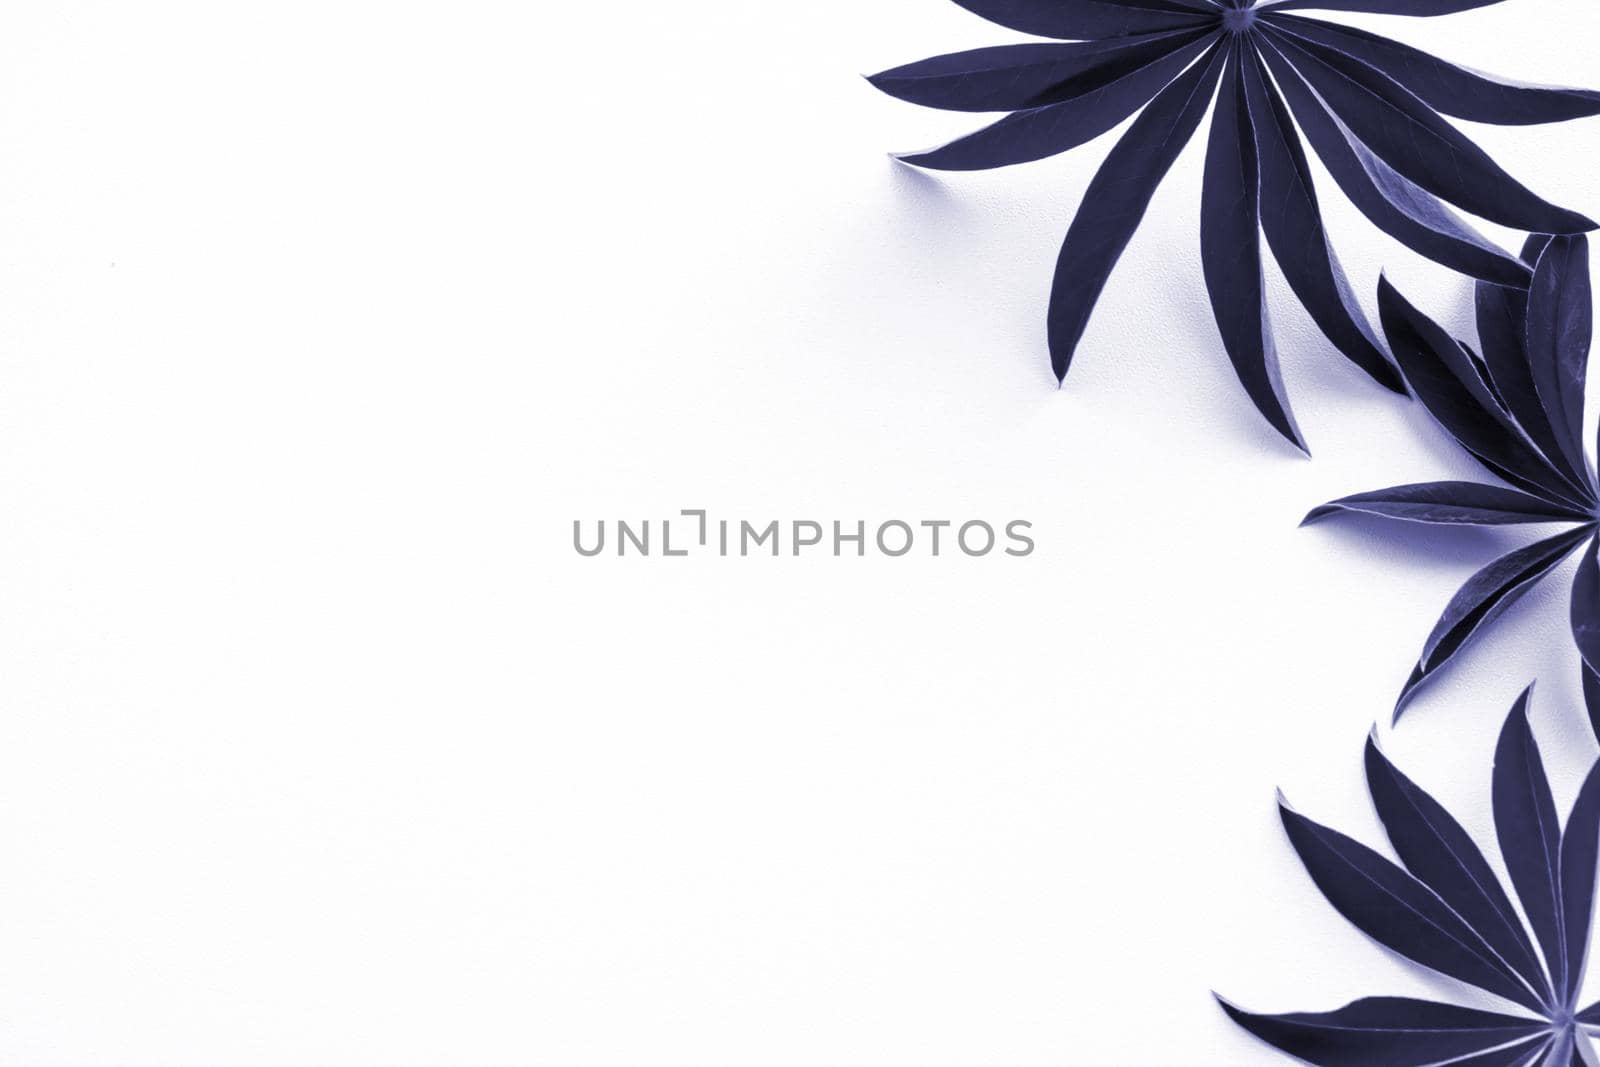 Beautiful blueberry-colored lupine leaves on a white background. The fashionable color of 2022 is Very Peri. Textured leaves.